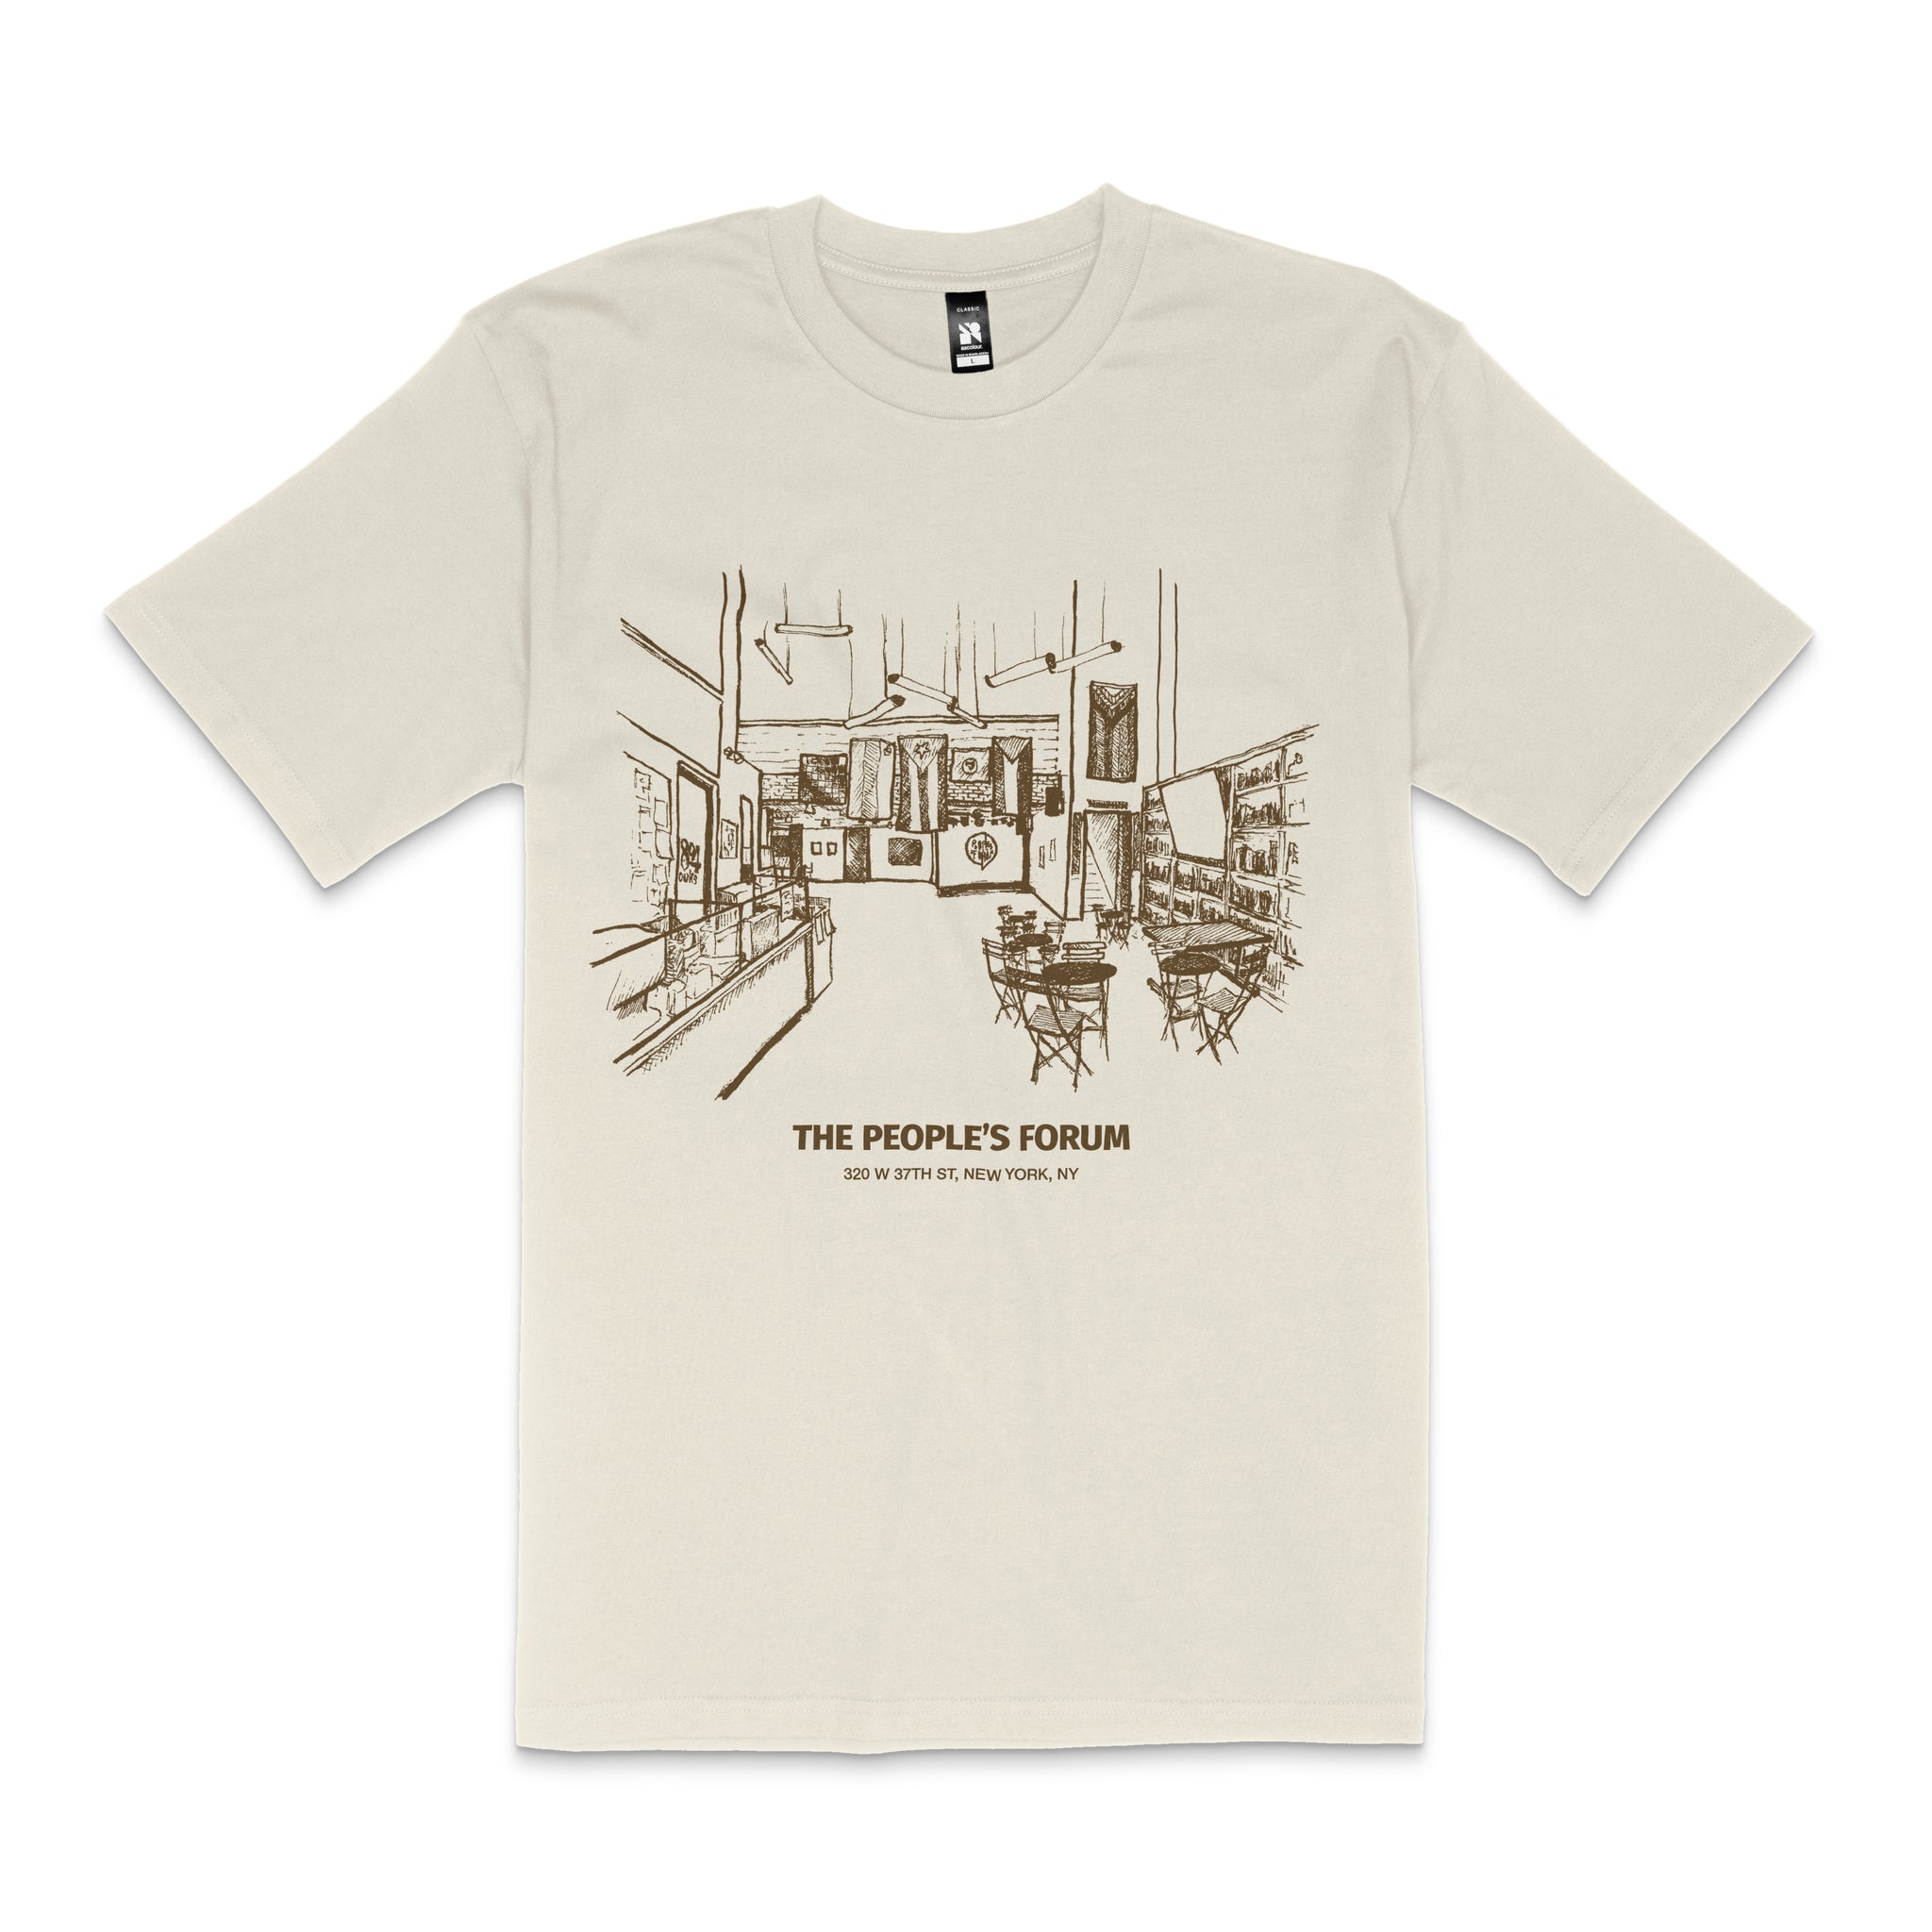 A Home For The People Shirt